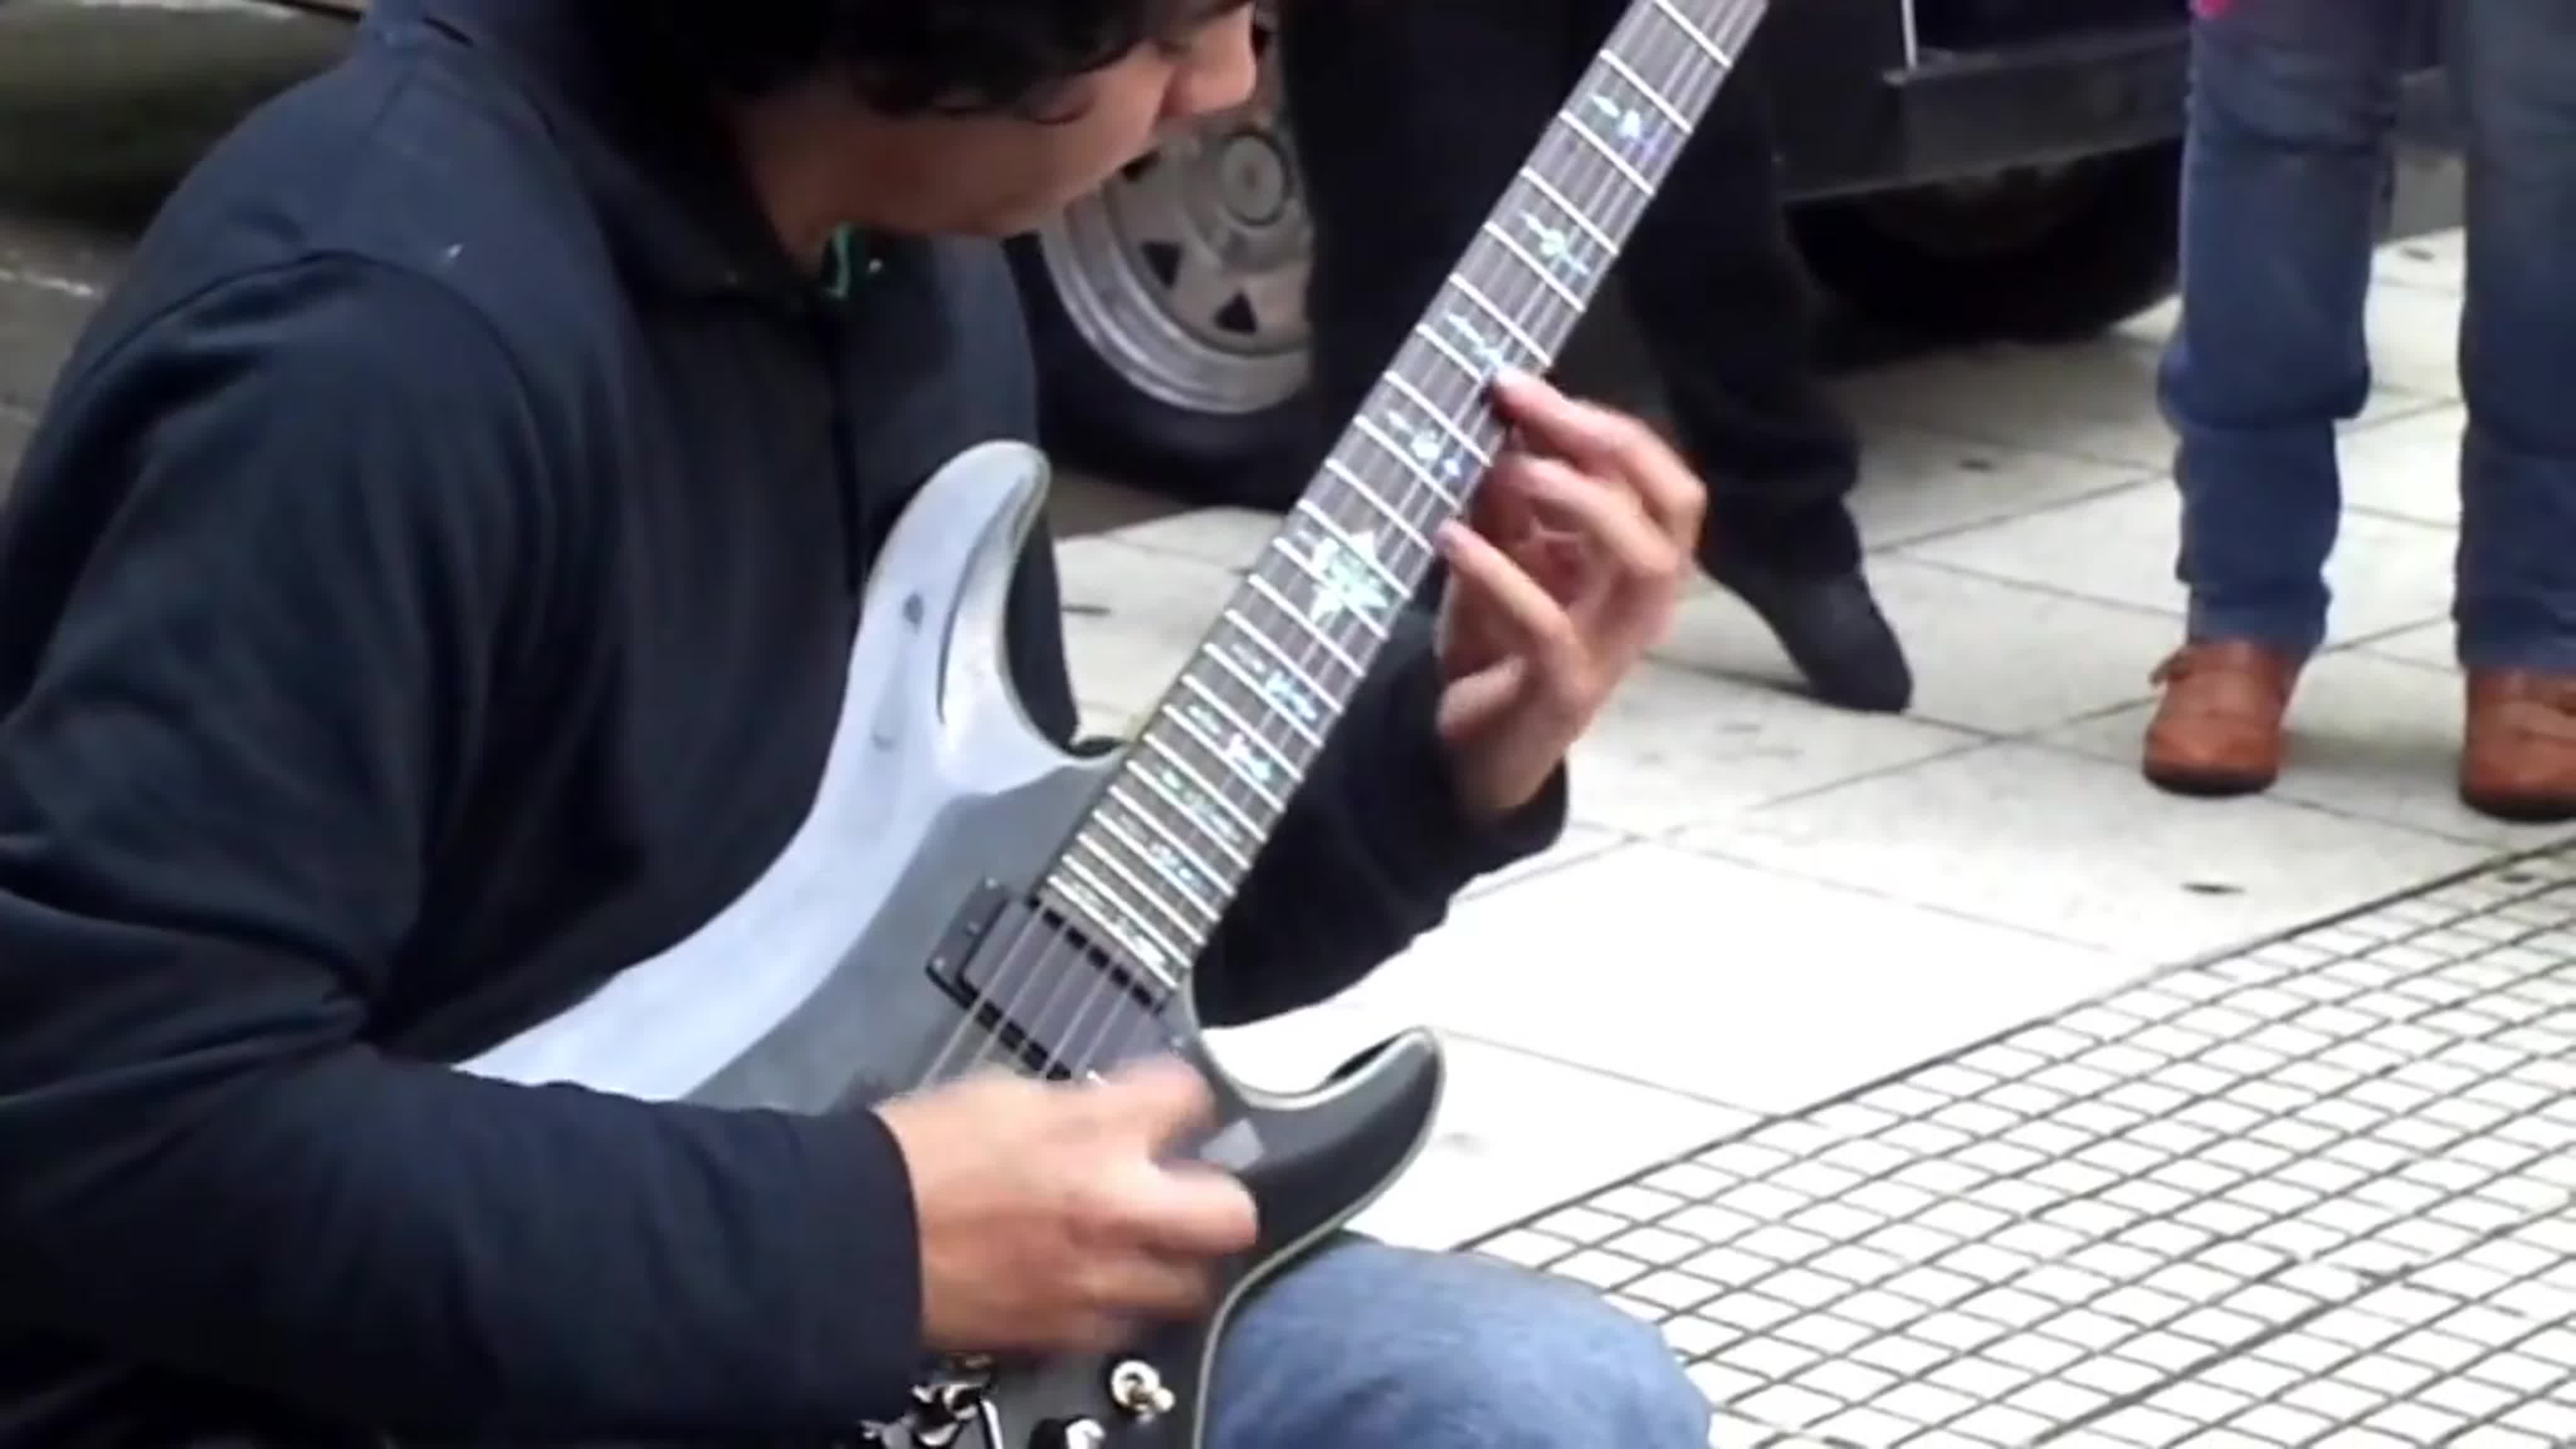 Damian salazar amazing guitar performance in buenos aires streets watch  online